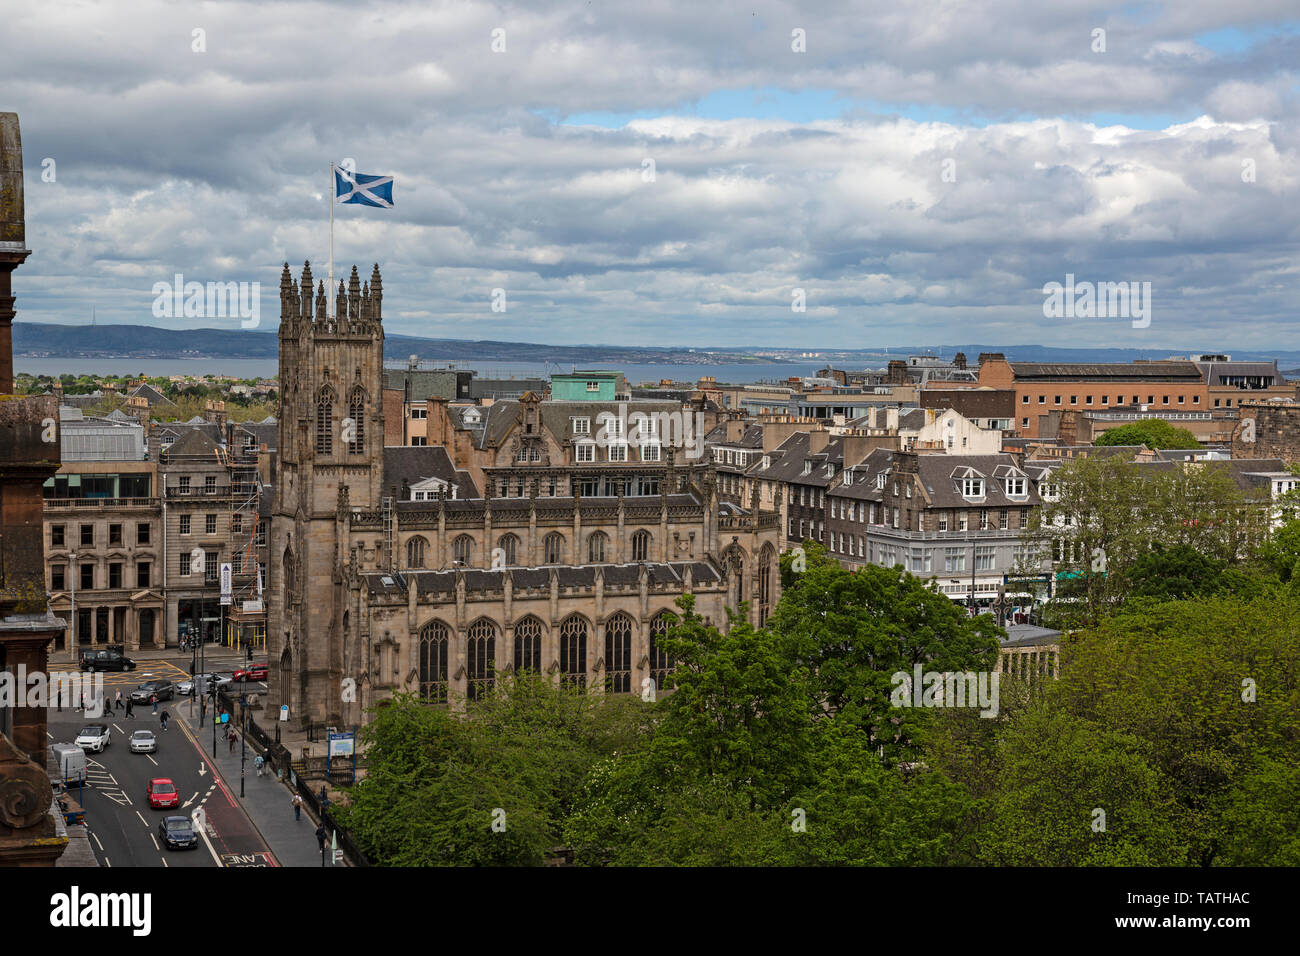 St. John's Church, at the intersection of Lothian Road and Princes Street in Edinburgh, Scotland. Stock Photo